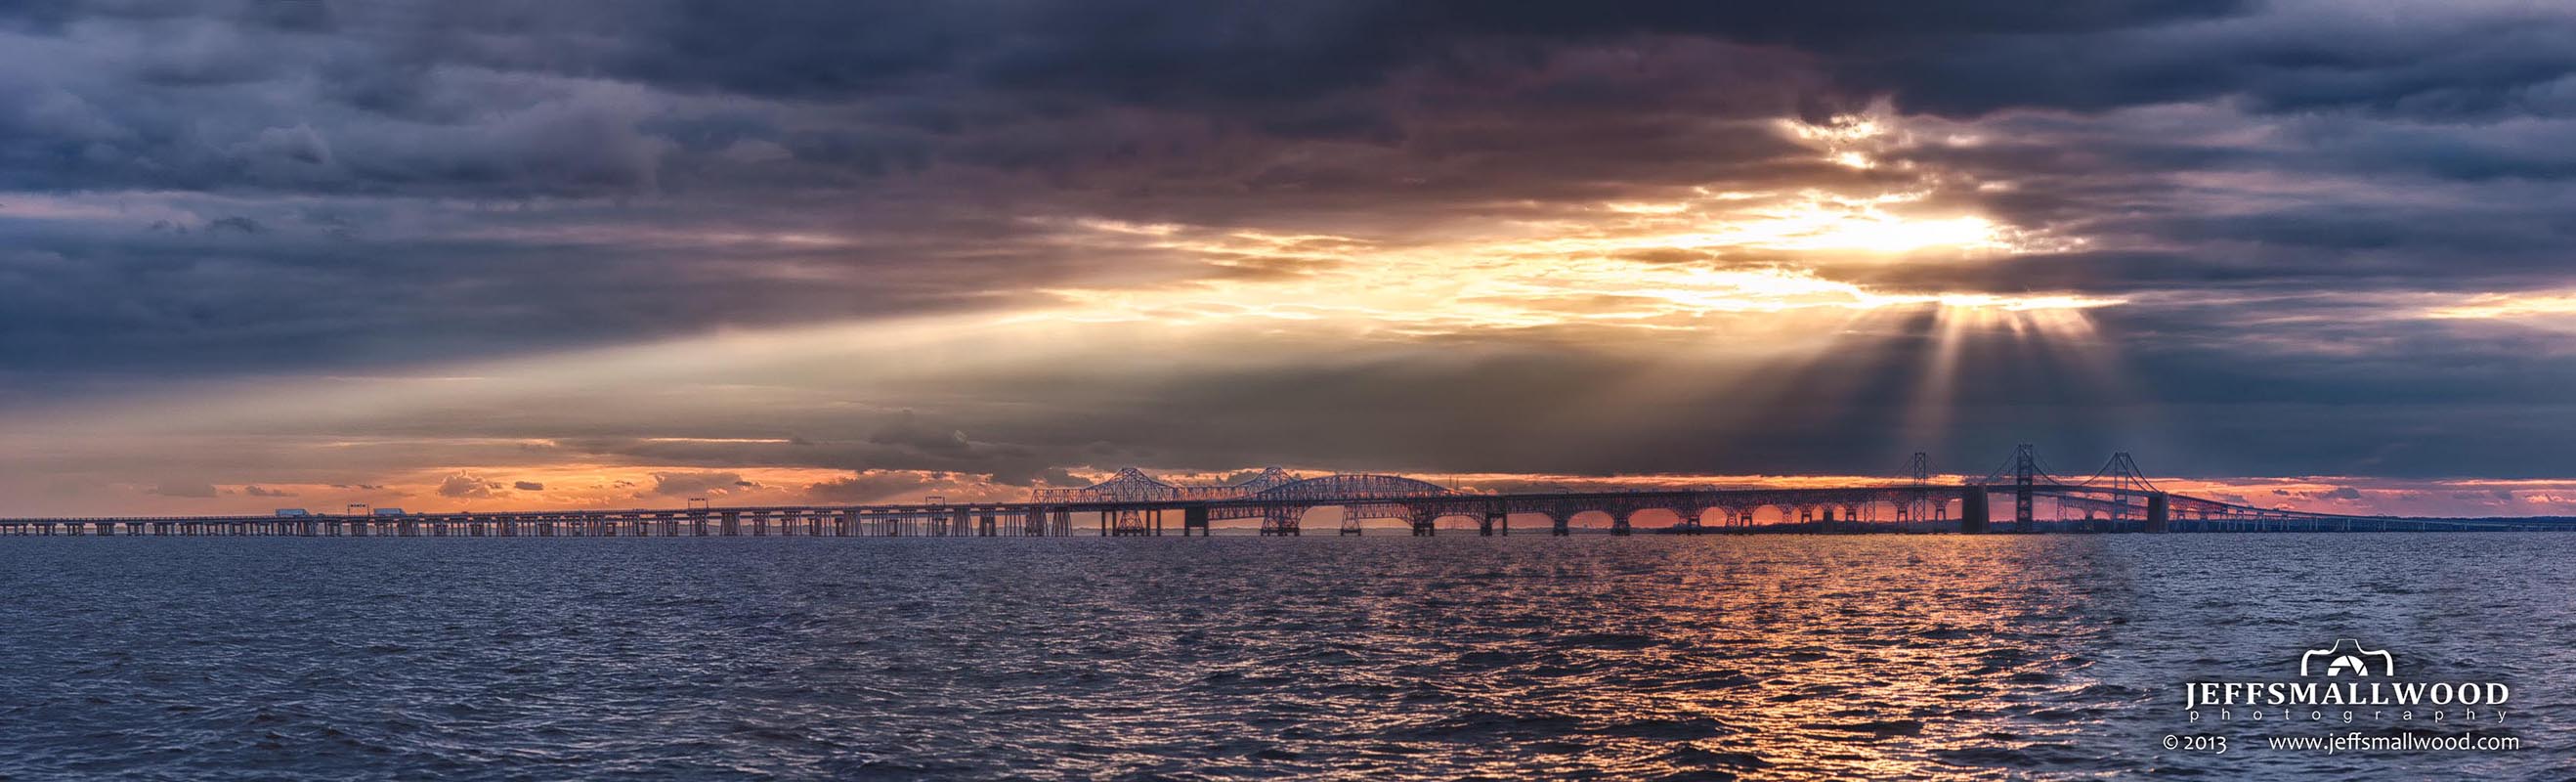 Through A Hole In The Clouds Over Chesapeake Bay Bridge At Sunset